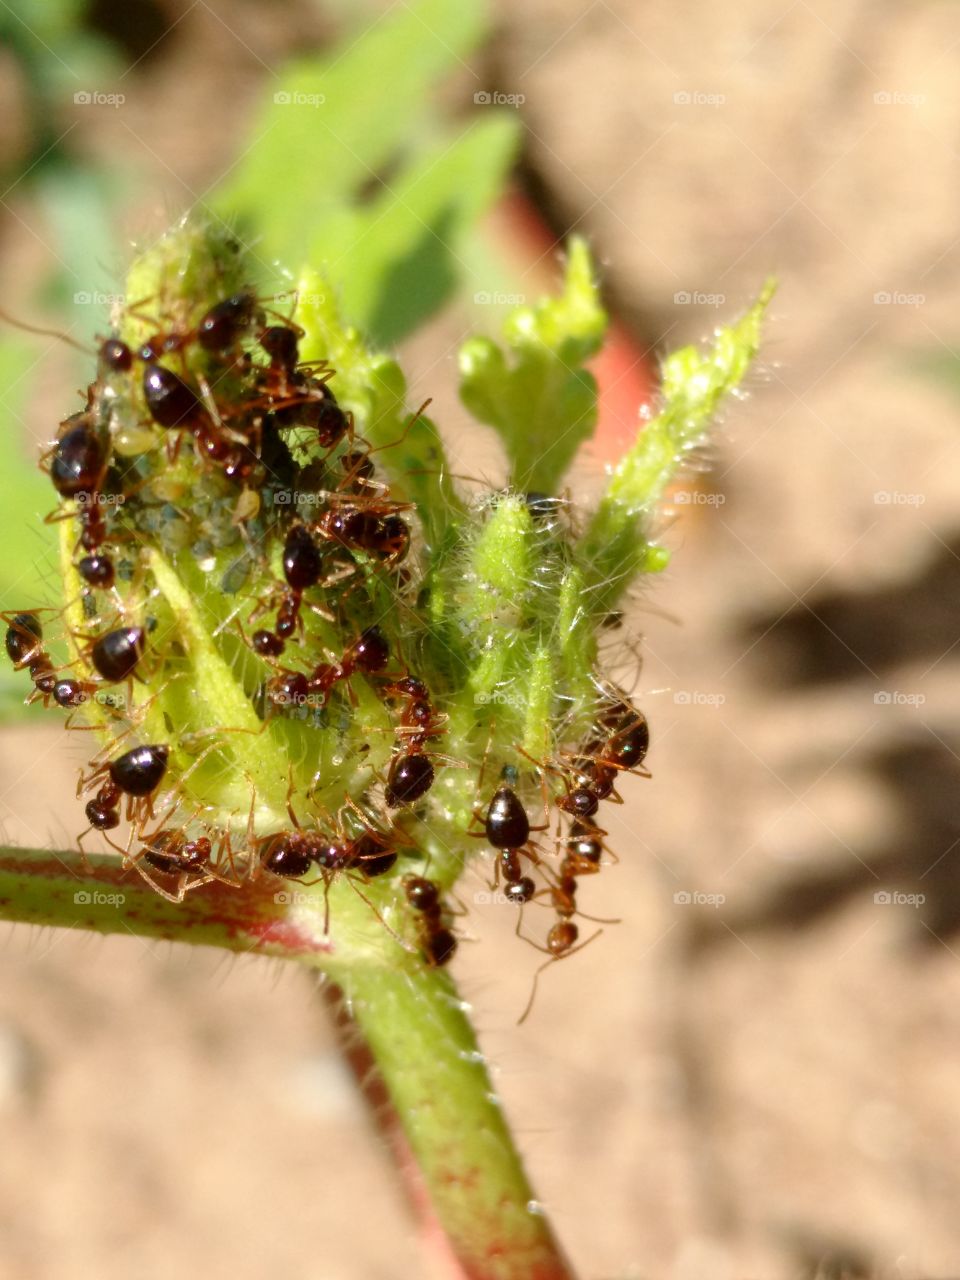 ants eating aphids on okra plant